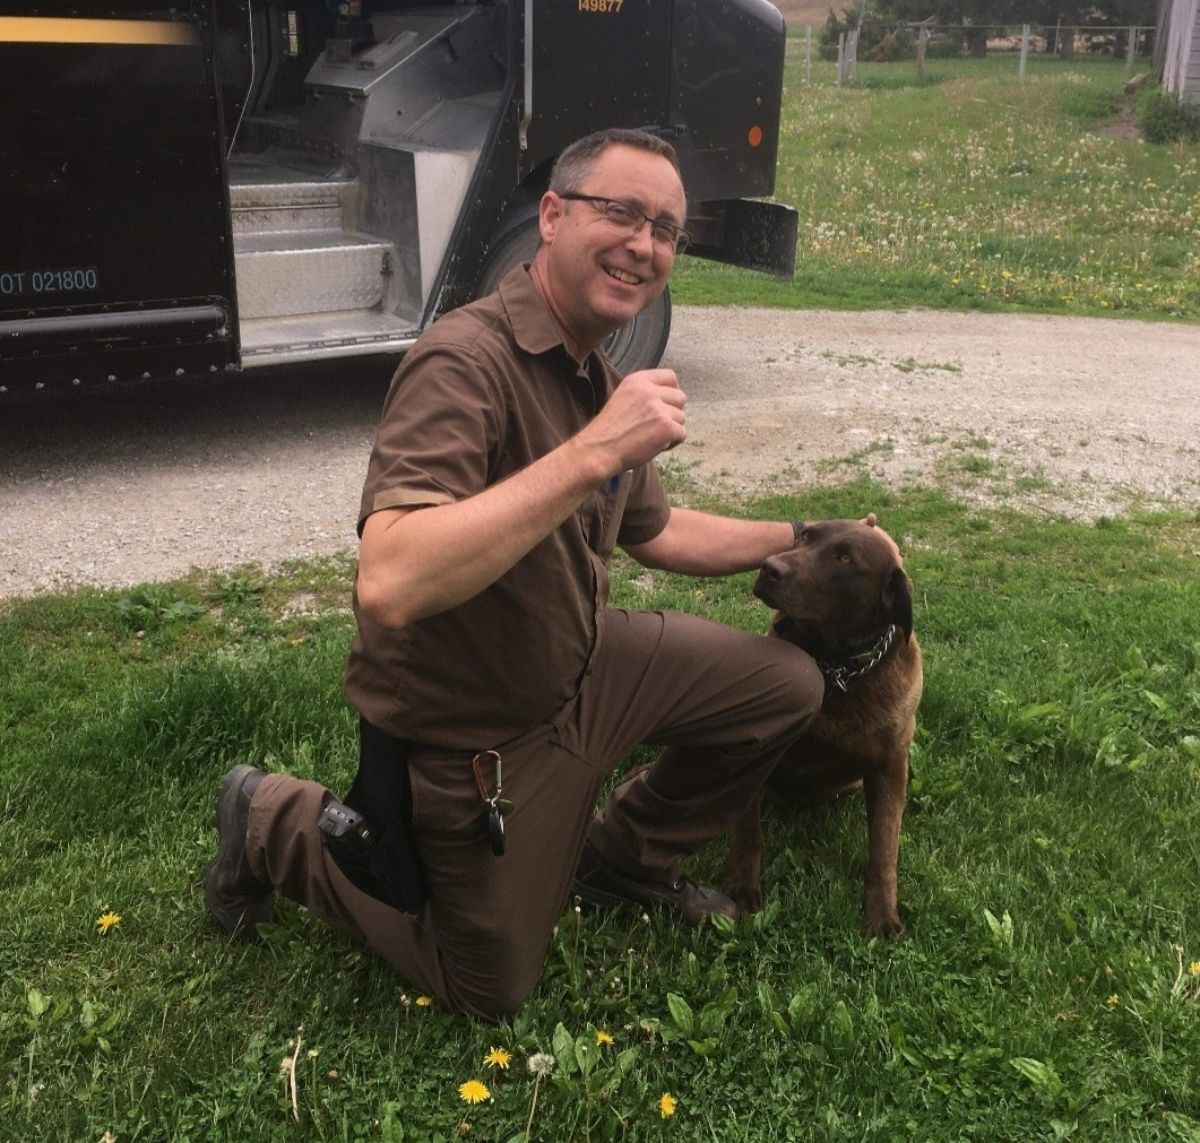 male ups driver kneeling on grass petting a brown dog